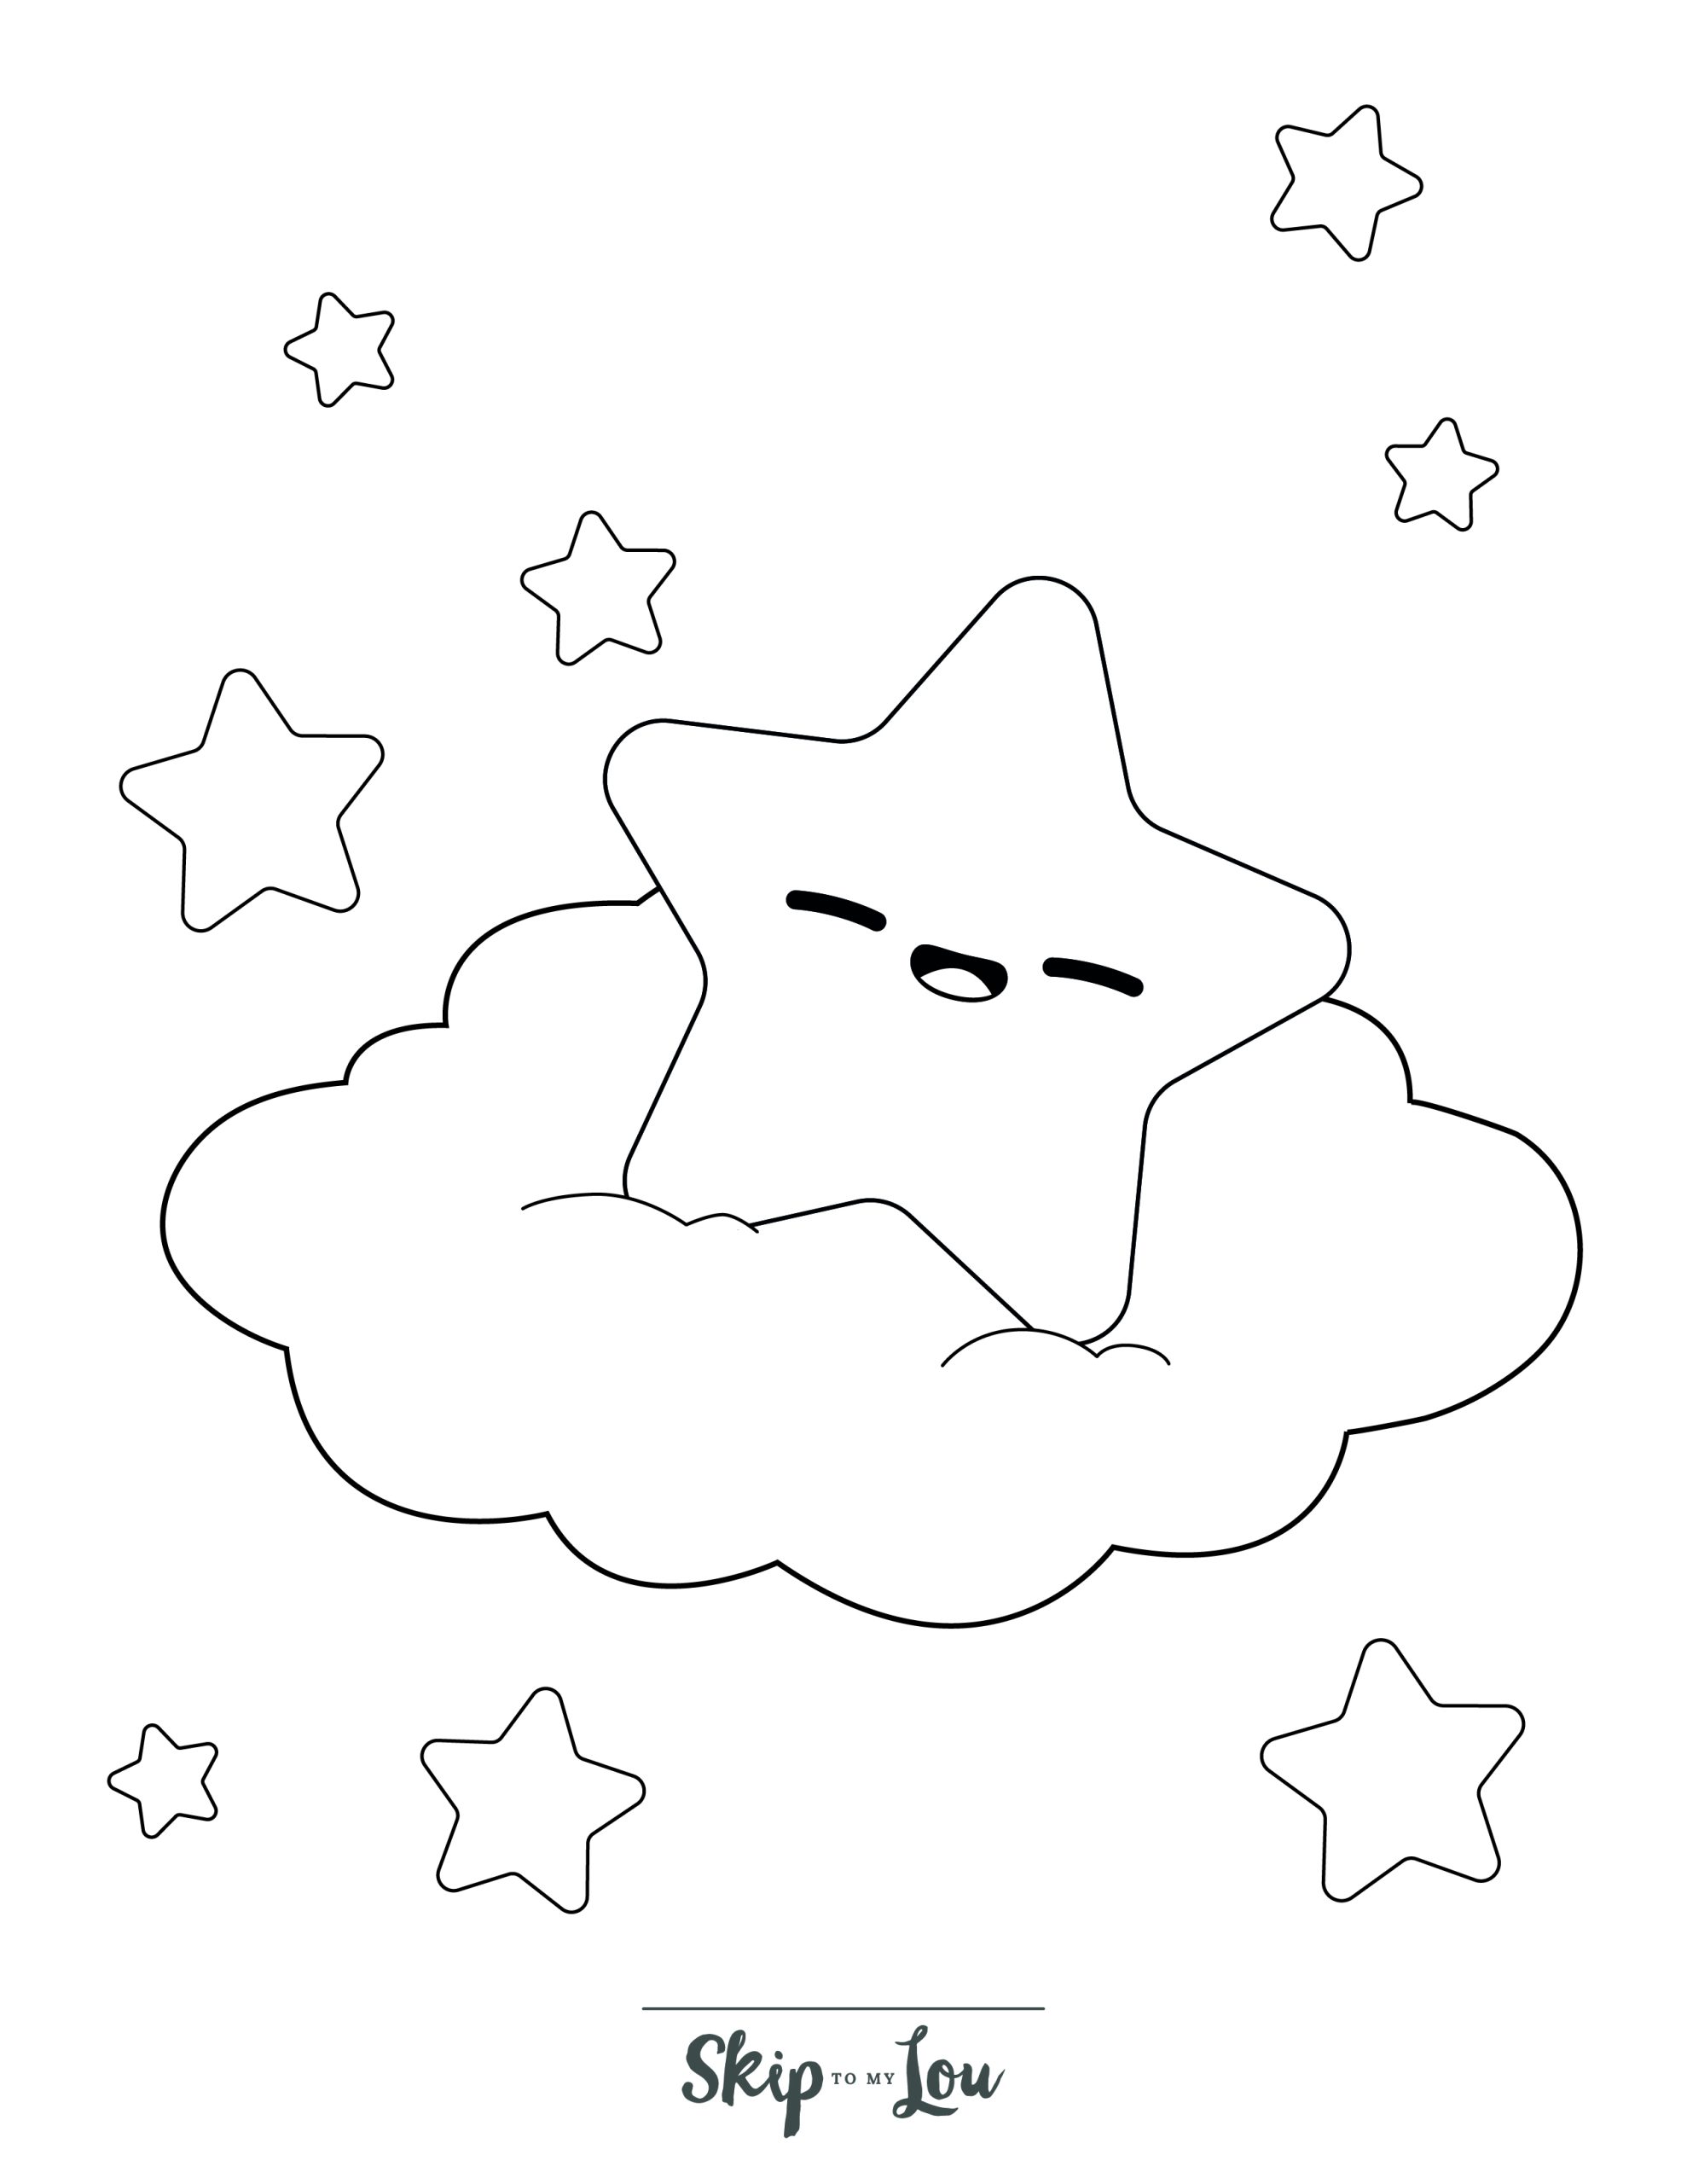 Star Coloring Page 4 - Line drawing of a star on a cloud with a face